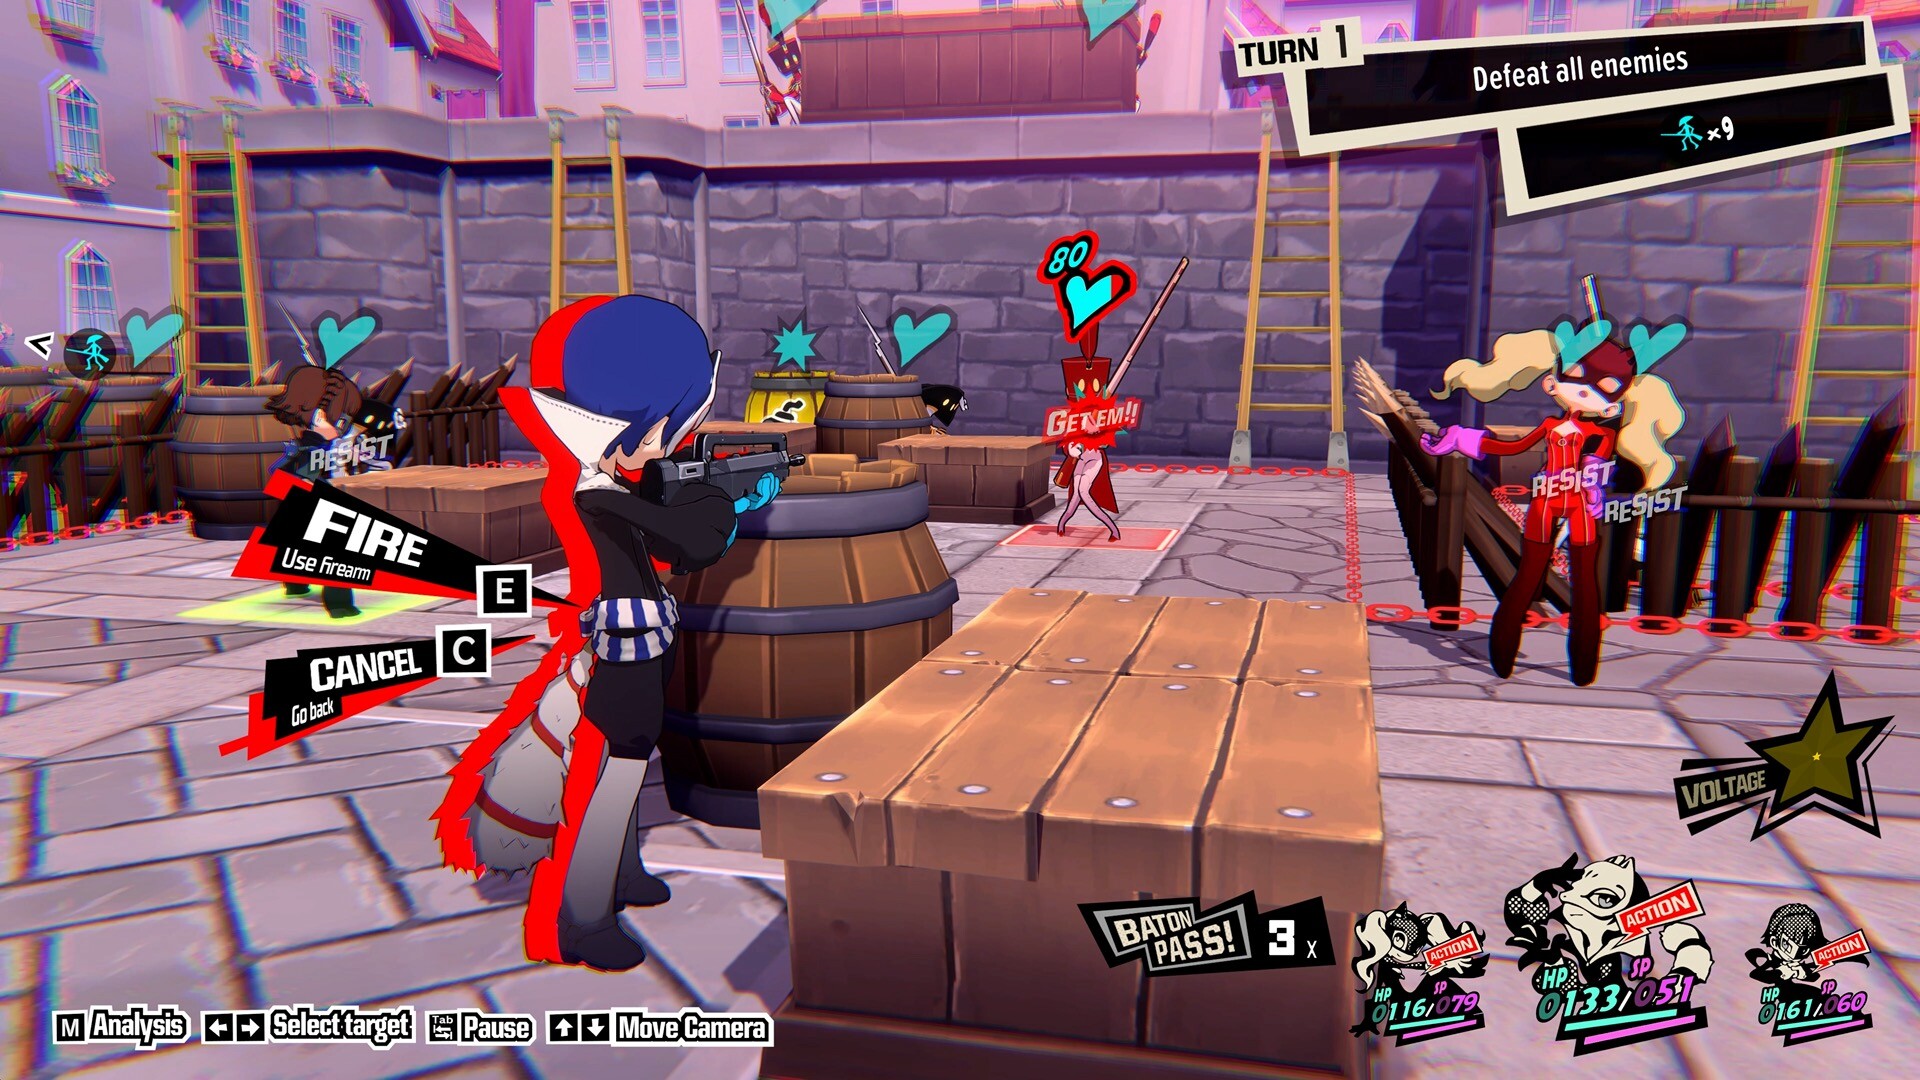 Persona 5 Tactica follows up an accidental early Steam launch by